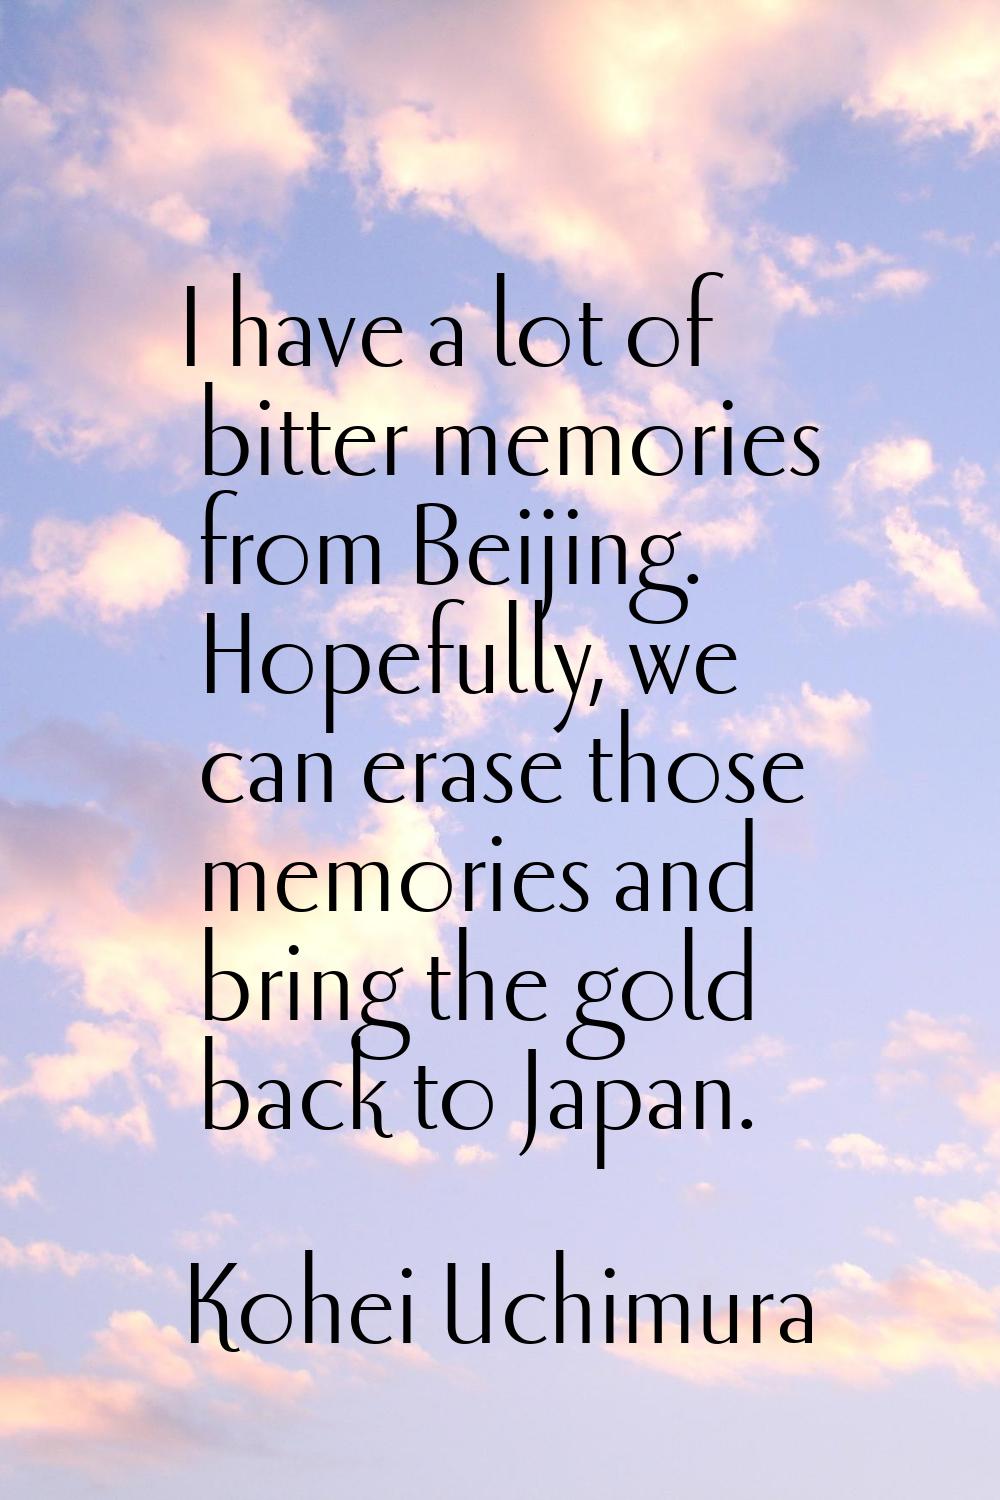 I have a lot of bitter memories from Beijing. Hopefully, we can erase those memories and bring the 